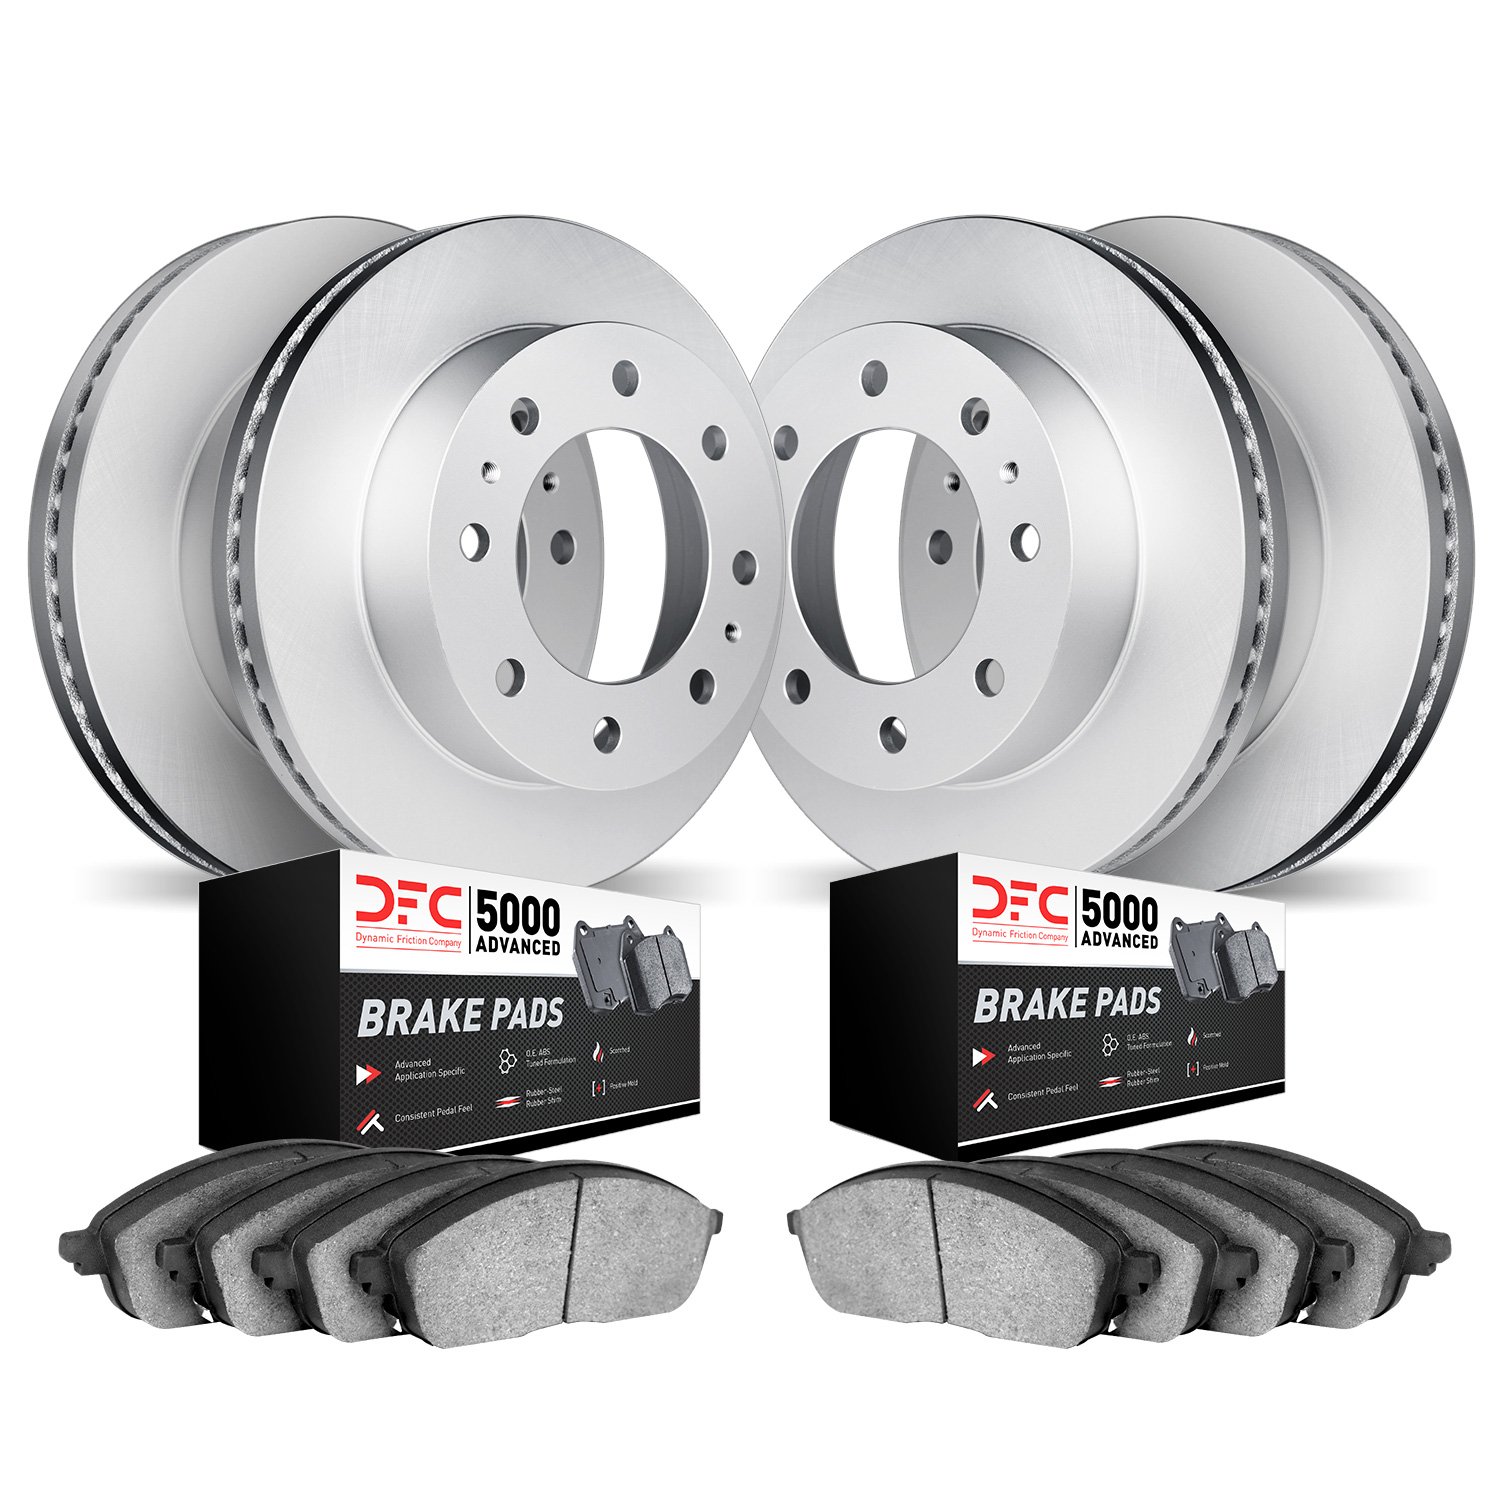 4504-54050 Geospec Brake Rotors w/5000 Advanced Brake Pads Kit, 2005-2007 Ford/Lincoln/Mercury/Mazda, Position: Front and Rear